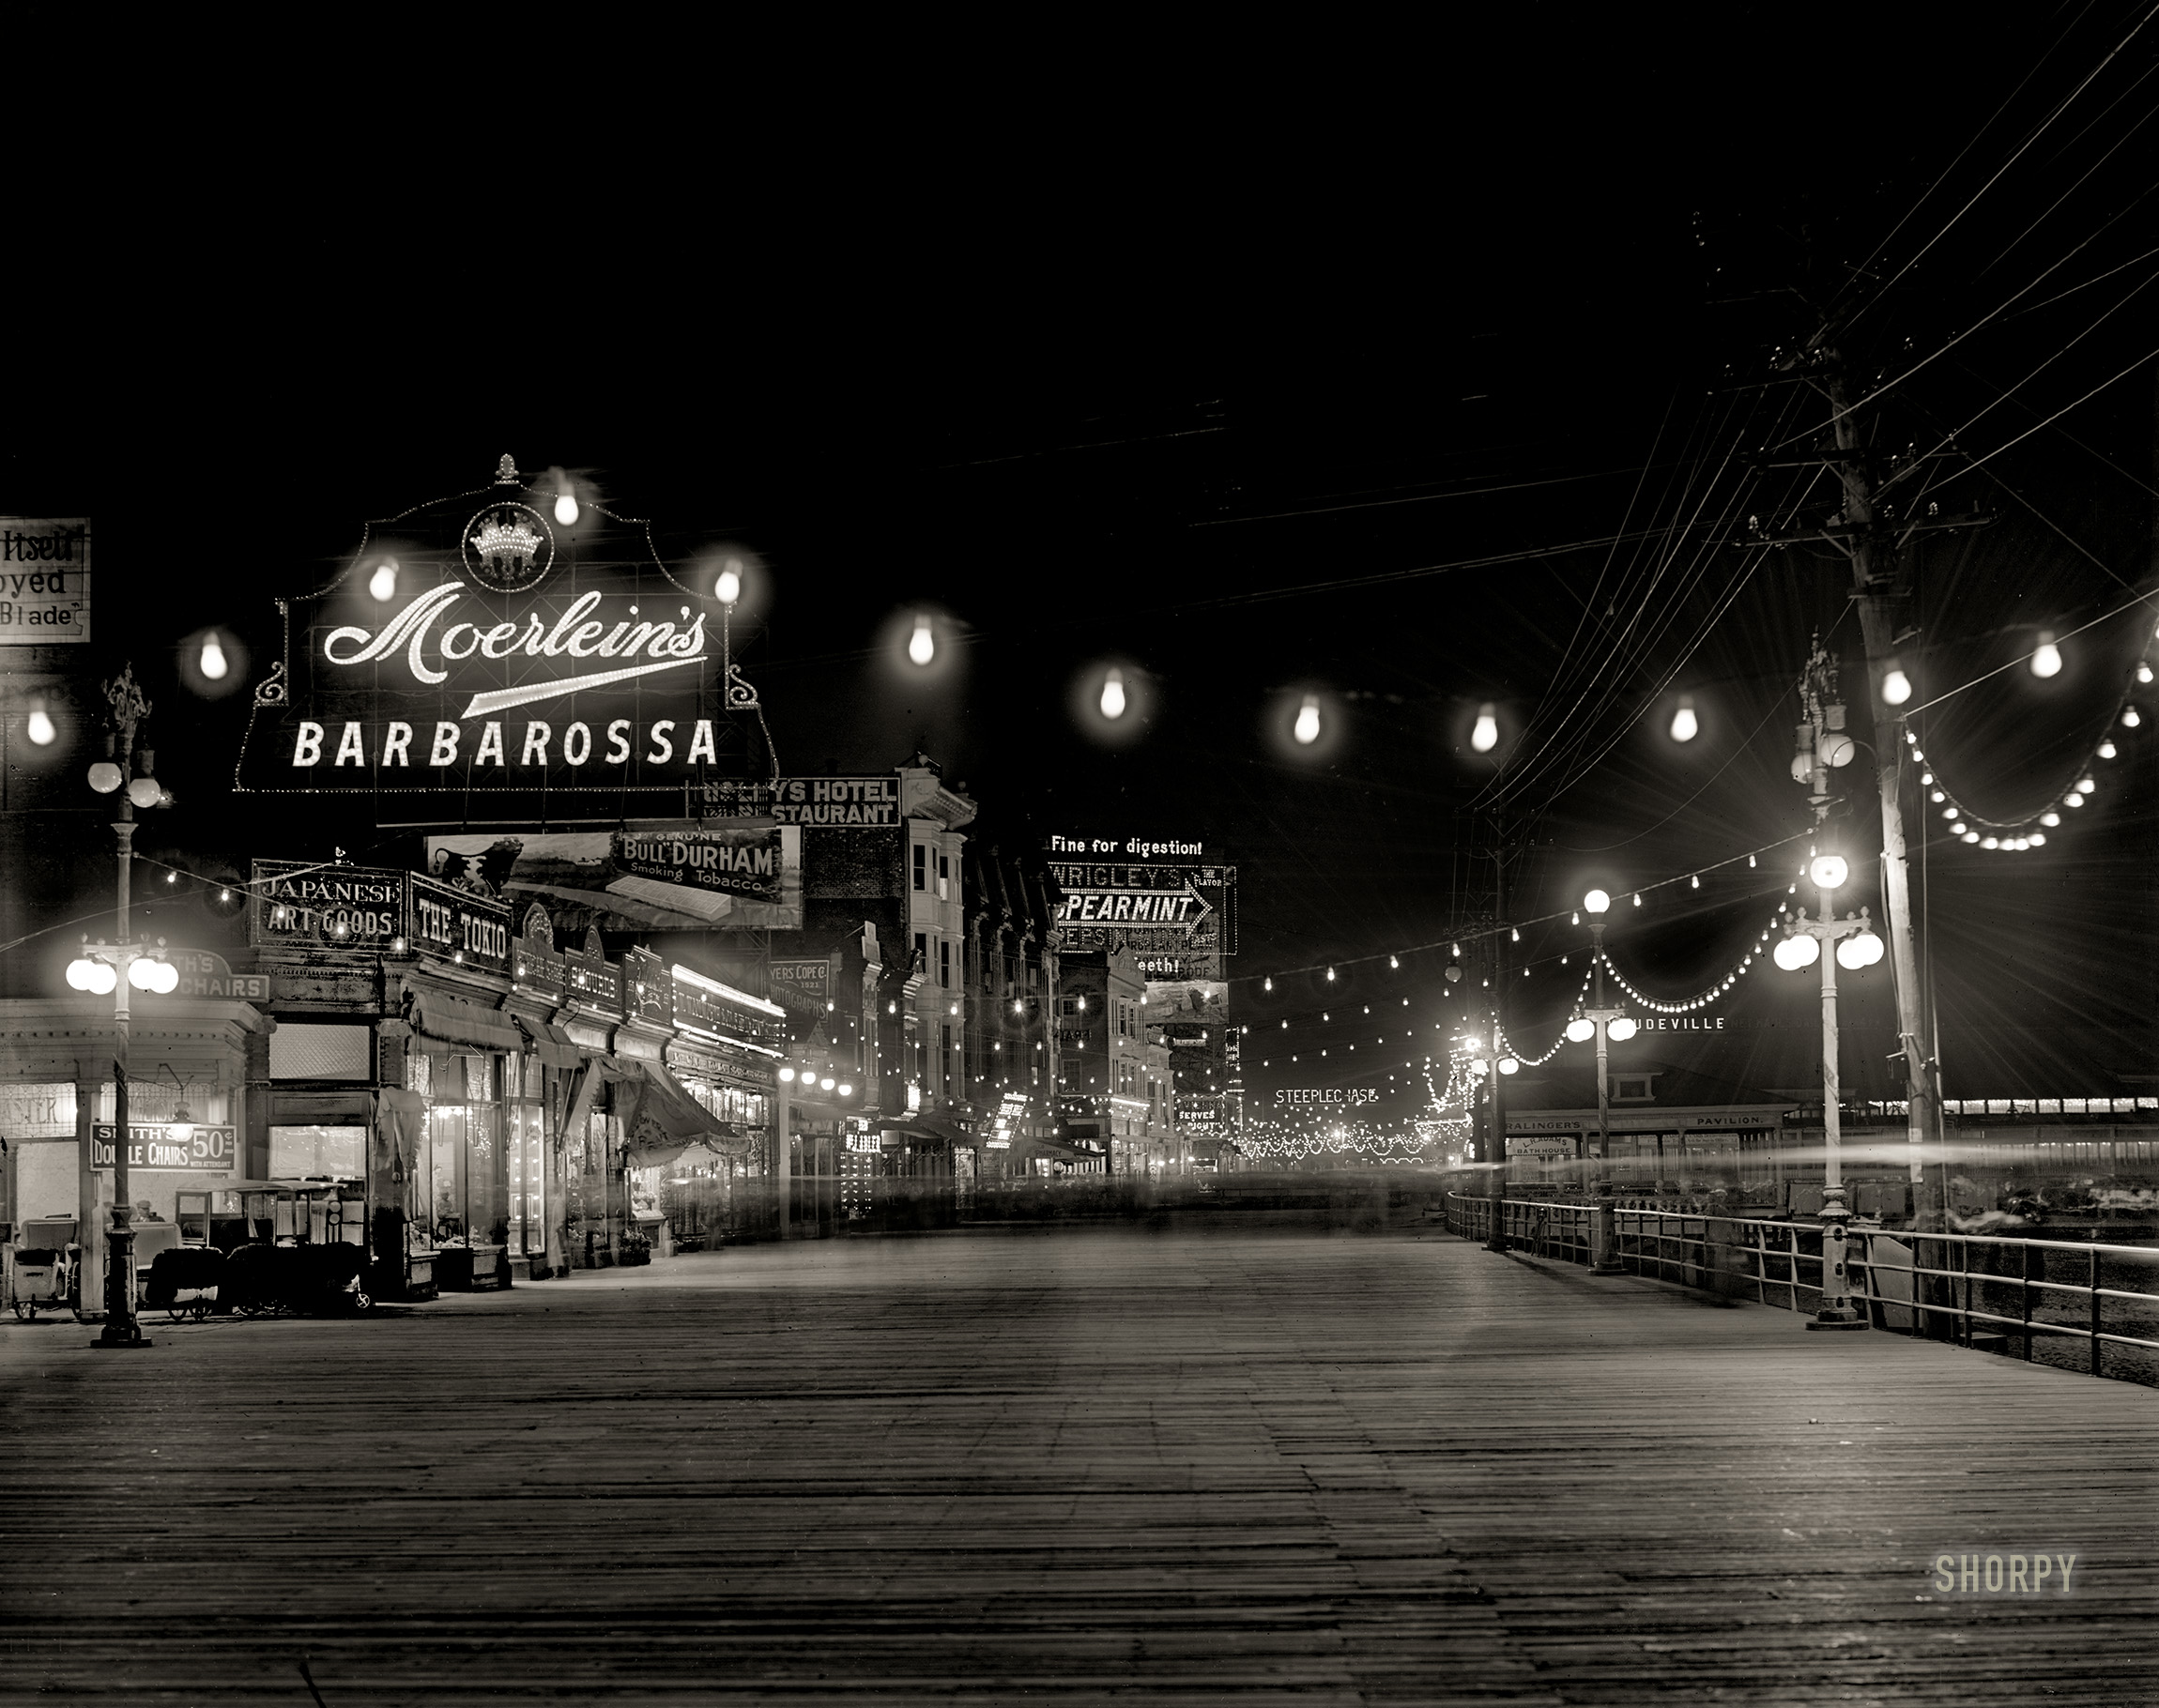 Atlantic City, New Jersey, circa 1910. "The Boardwalk at night." 8x10 inch dry plate glass negative, Detroit Publishing Company. View full size.